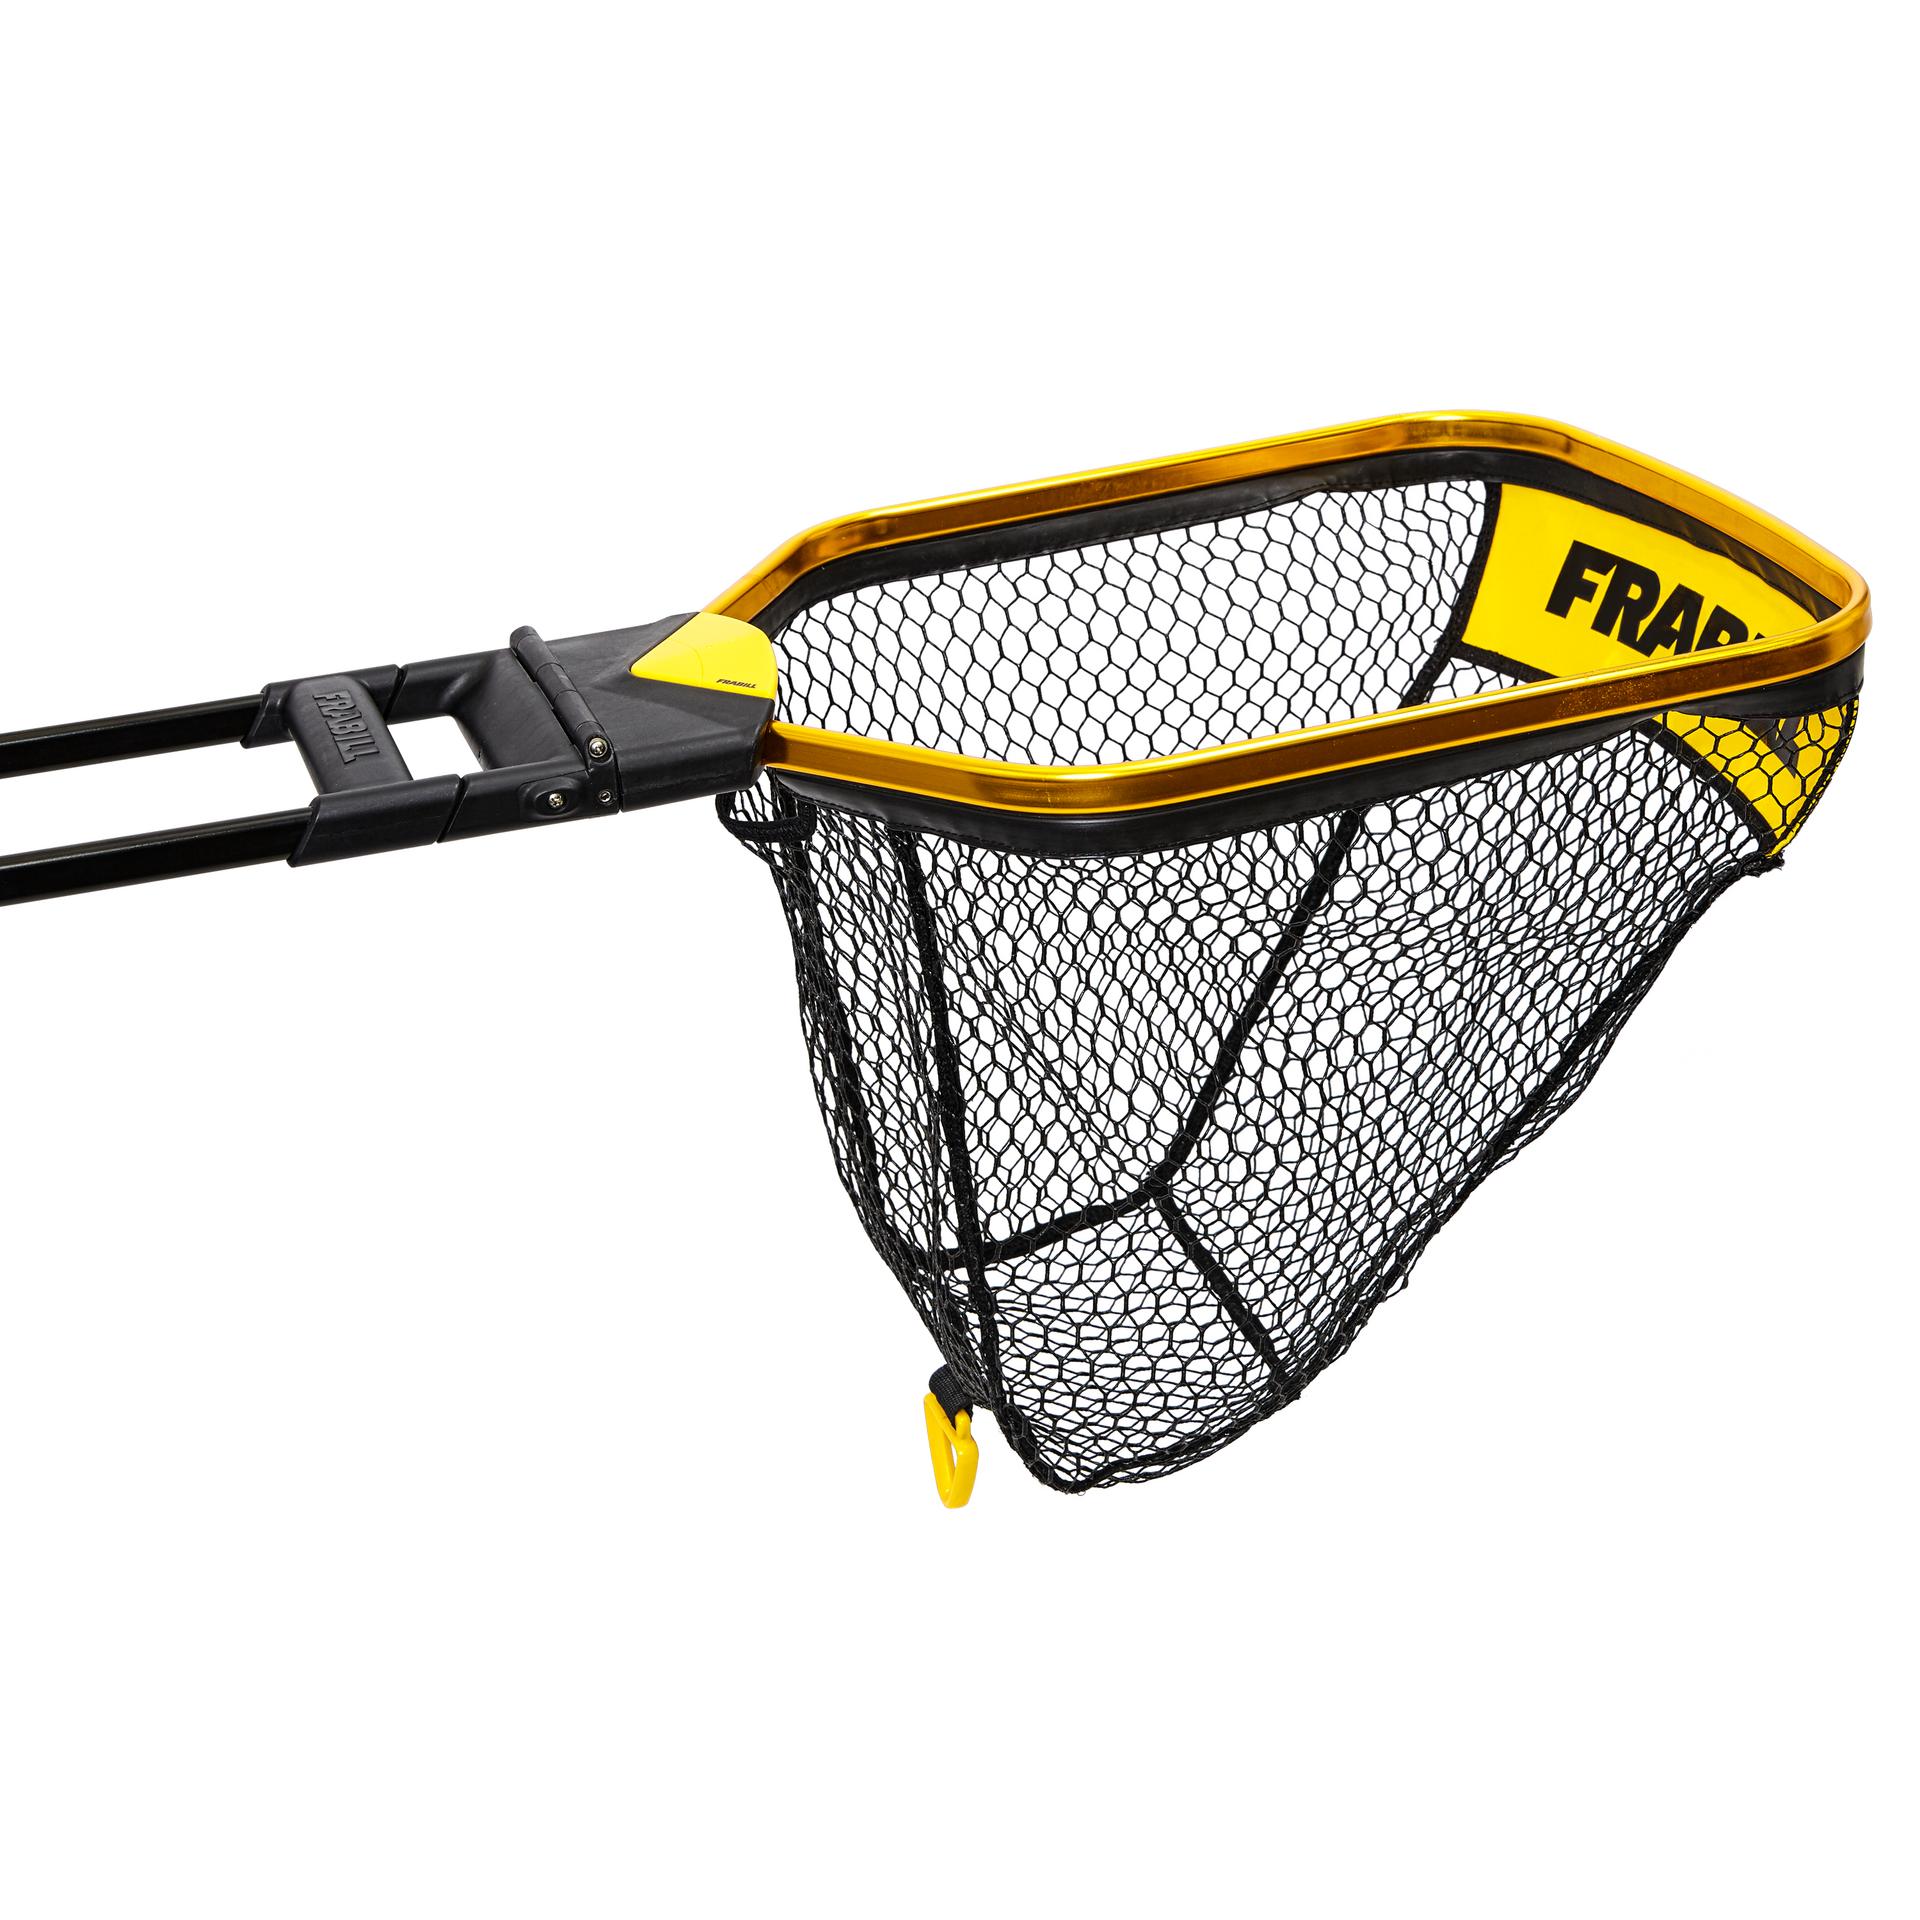 NET FRABILL FISHING Power Catch Weighted Coated Netting Multiple Hoop Sizes  $283.41 - PicClick